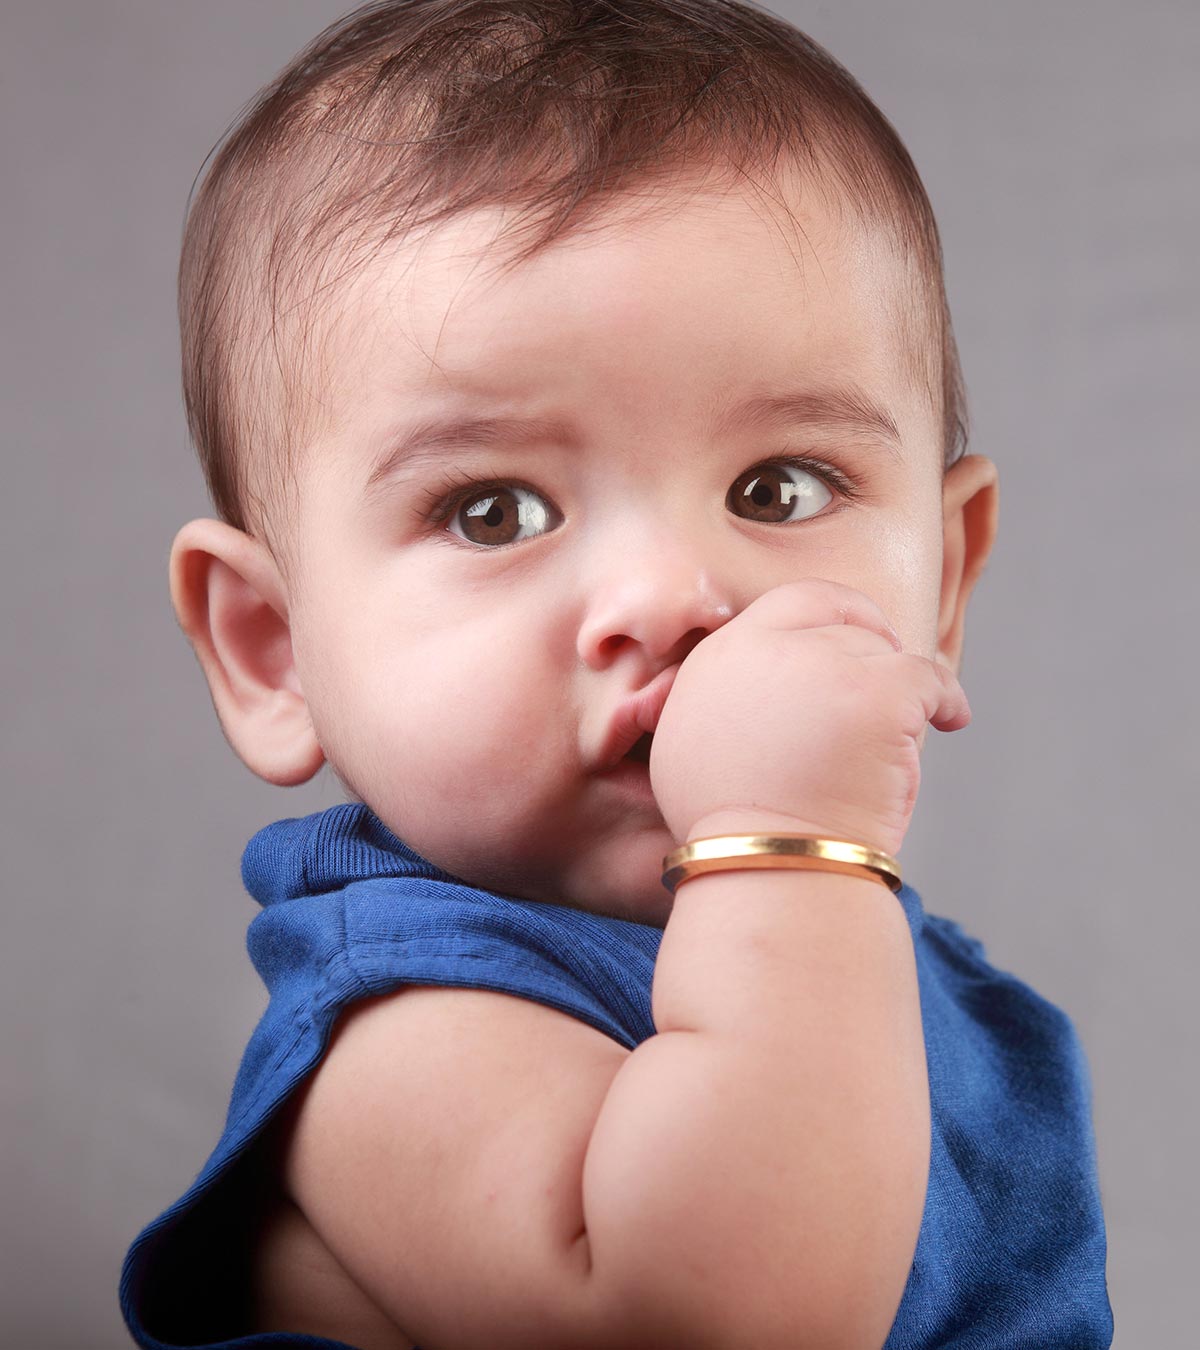 300+ Latest, Modern, And Unique Hindu Baby Boy Names